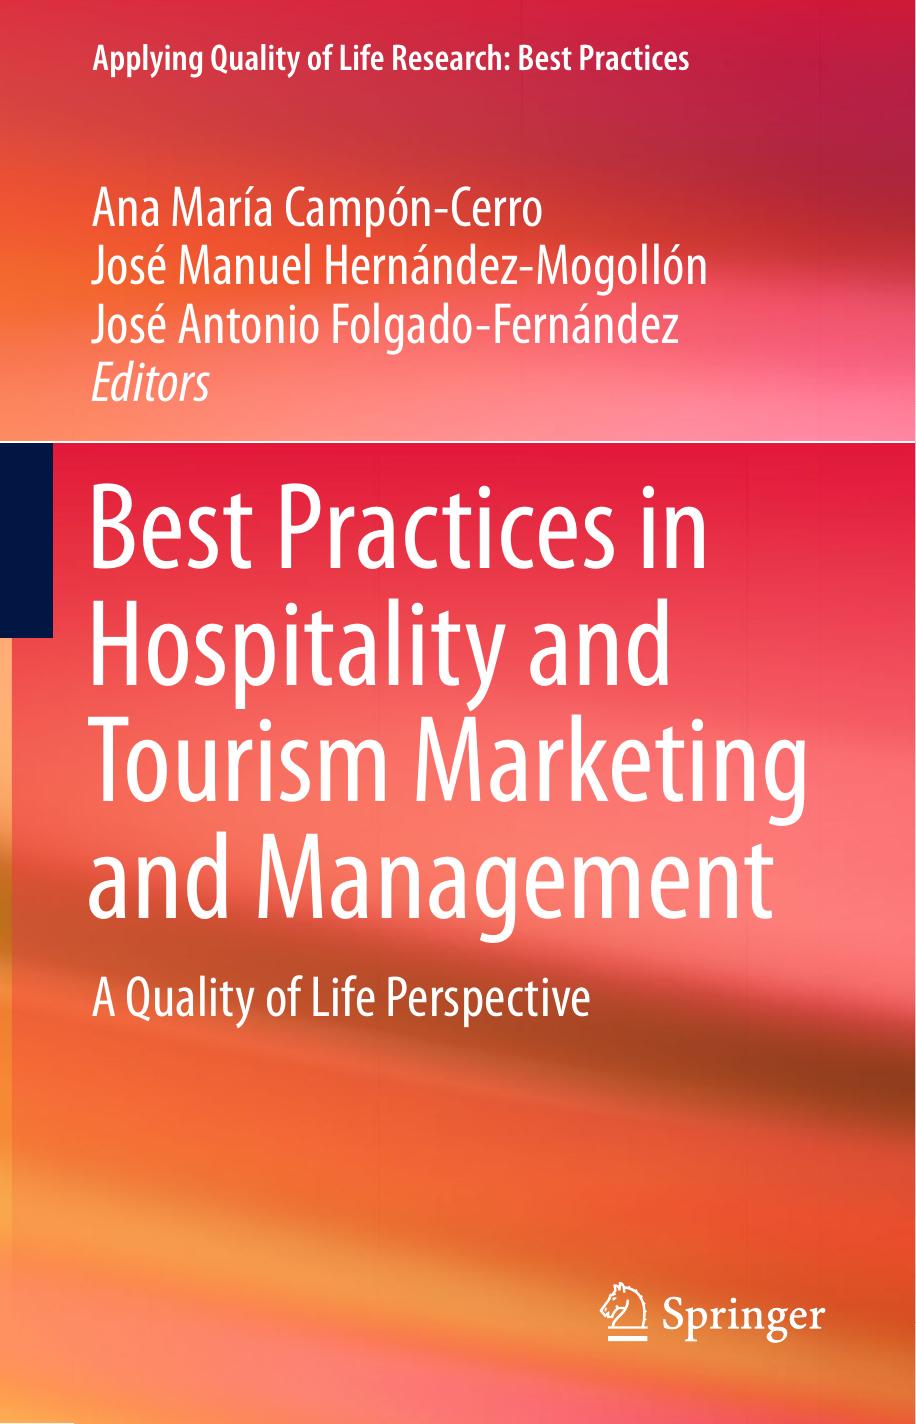 Best Practices in Hospitality and Tourism Marketing and Management ( PDFDrive ) 2019